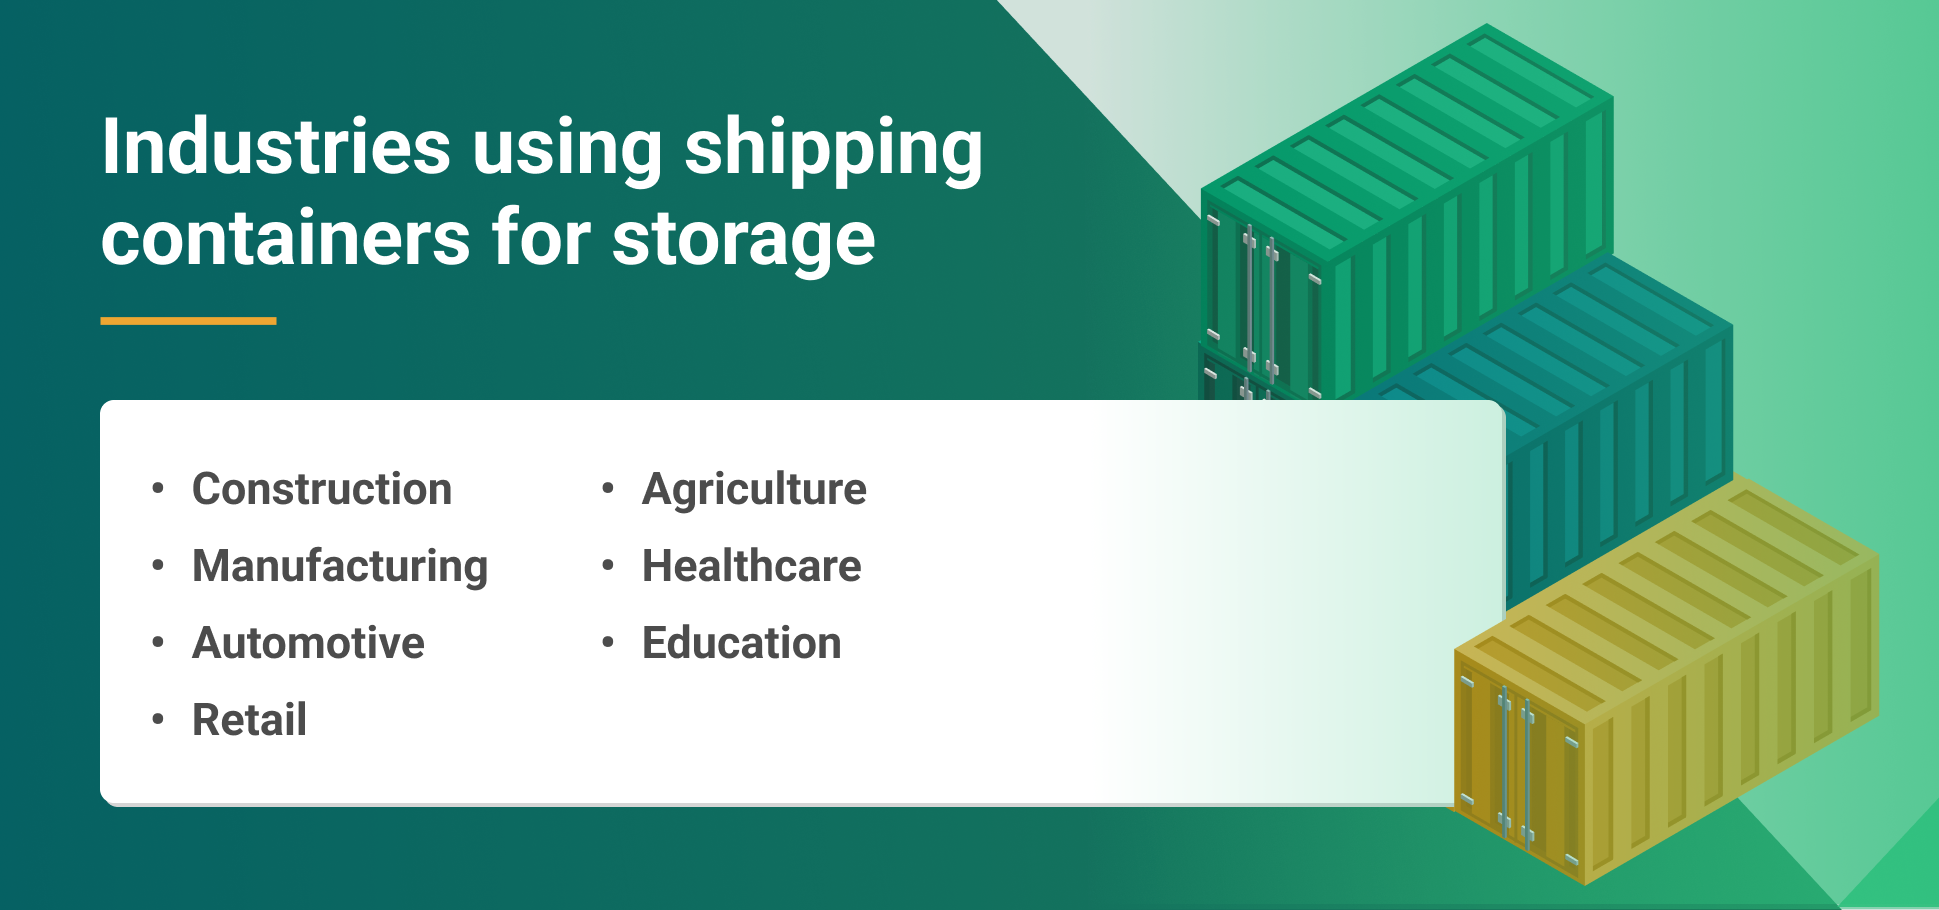 Industries using shipping containers for storage